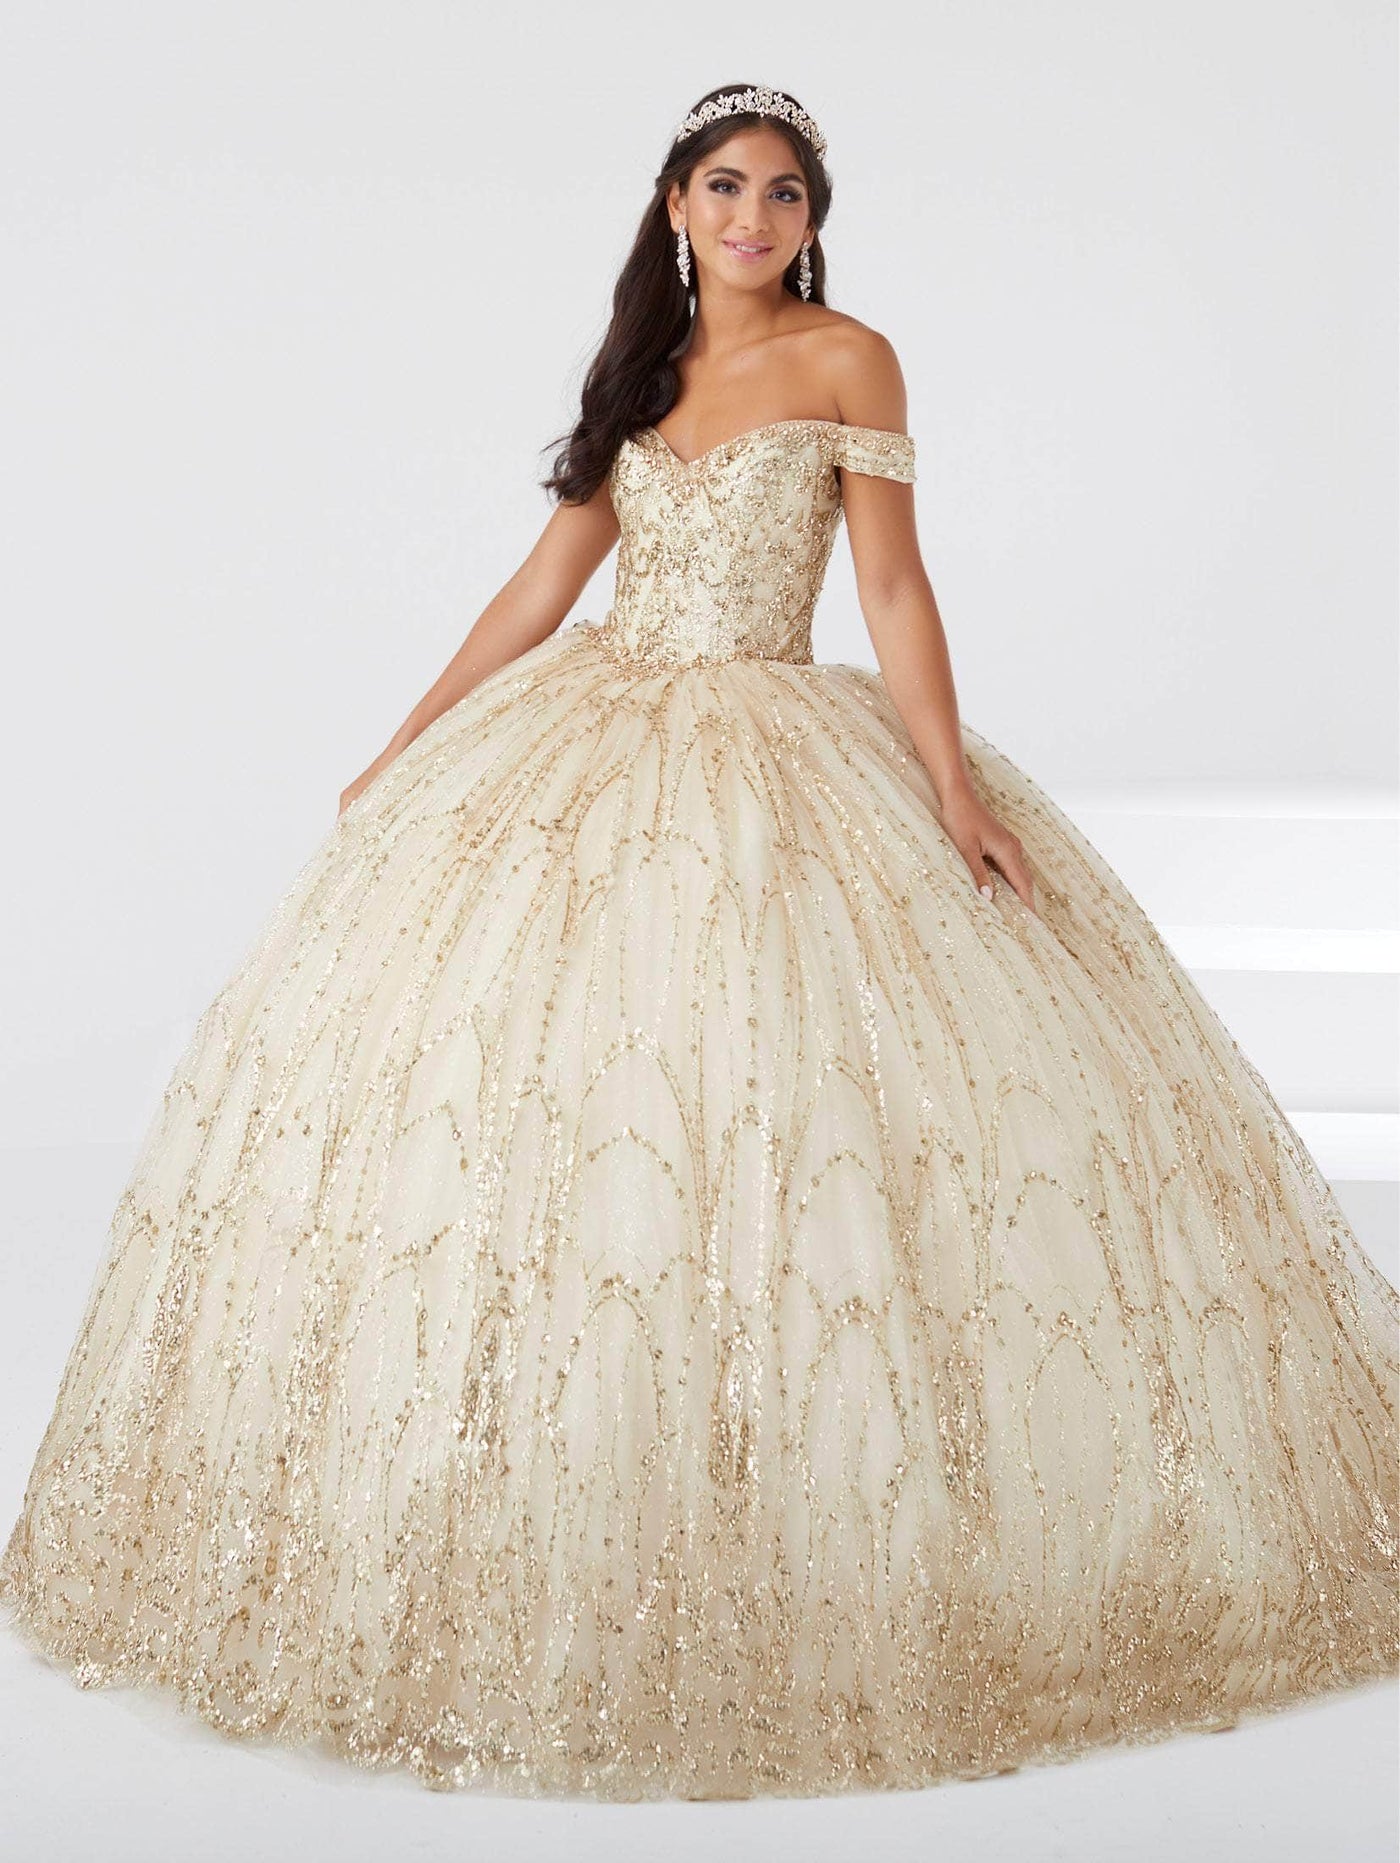 Fiesta Gowns 56463 - Arched Detail Glittered Ball Gown Special Occasion Dress